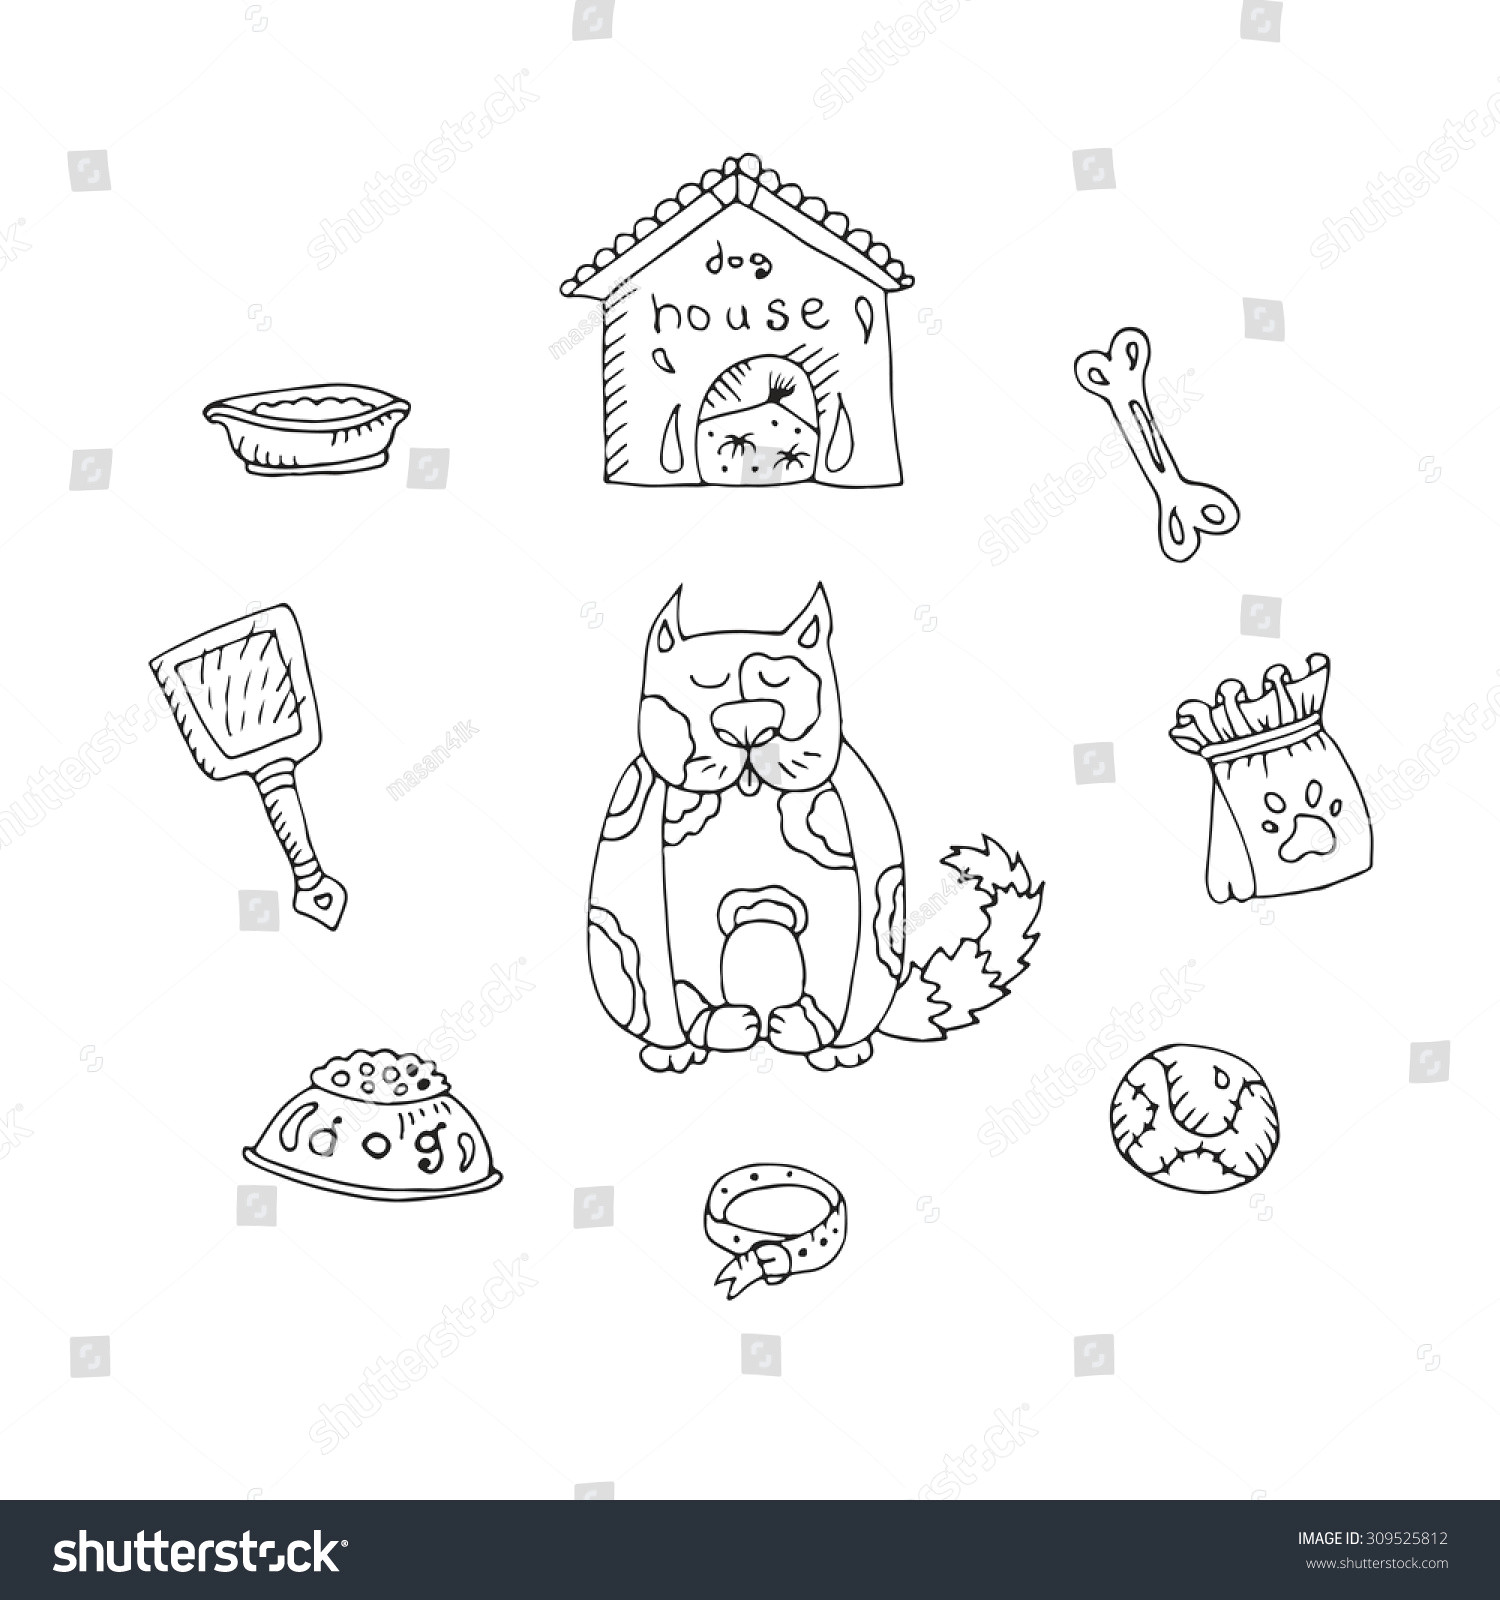 vector set for dogs various objects dog house ball bone bowl